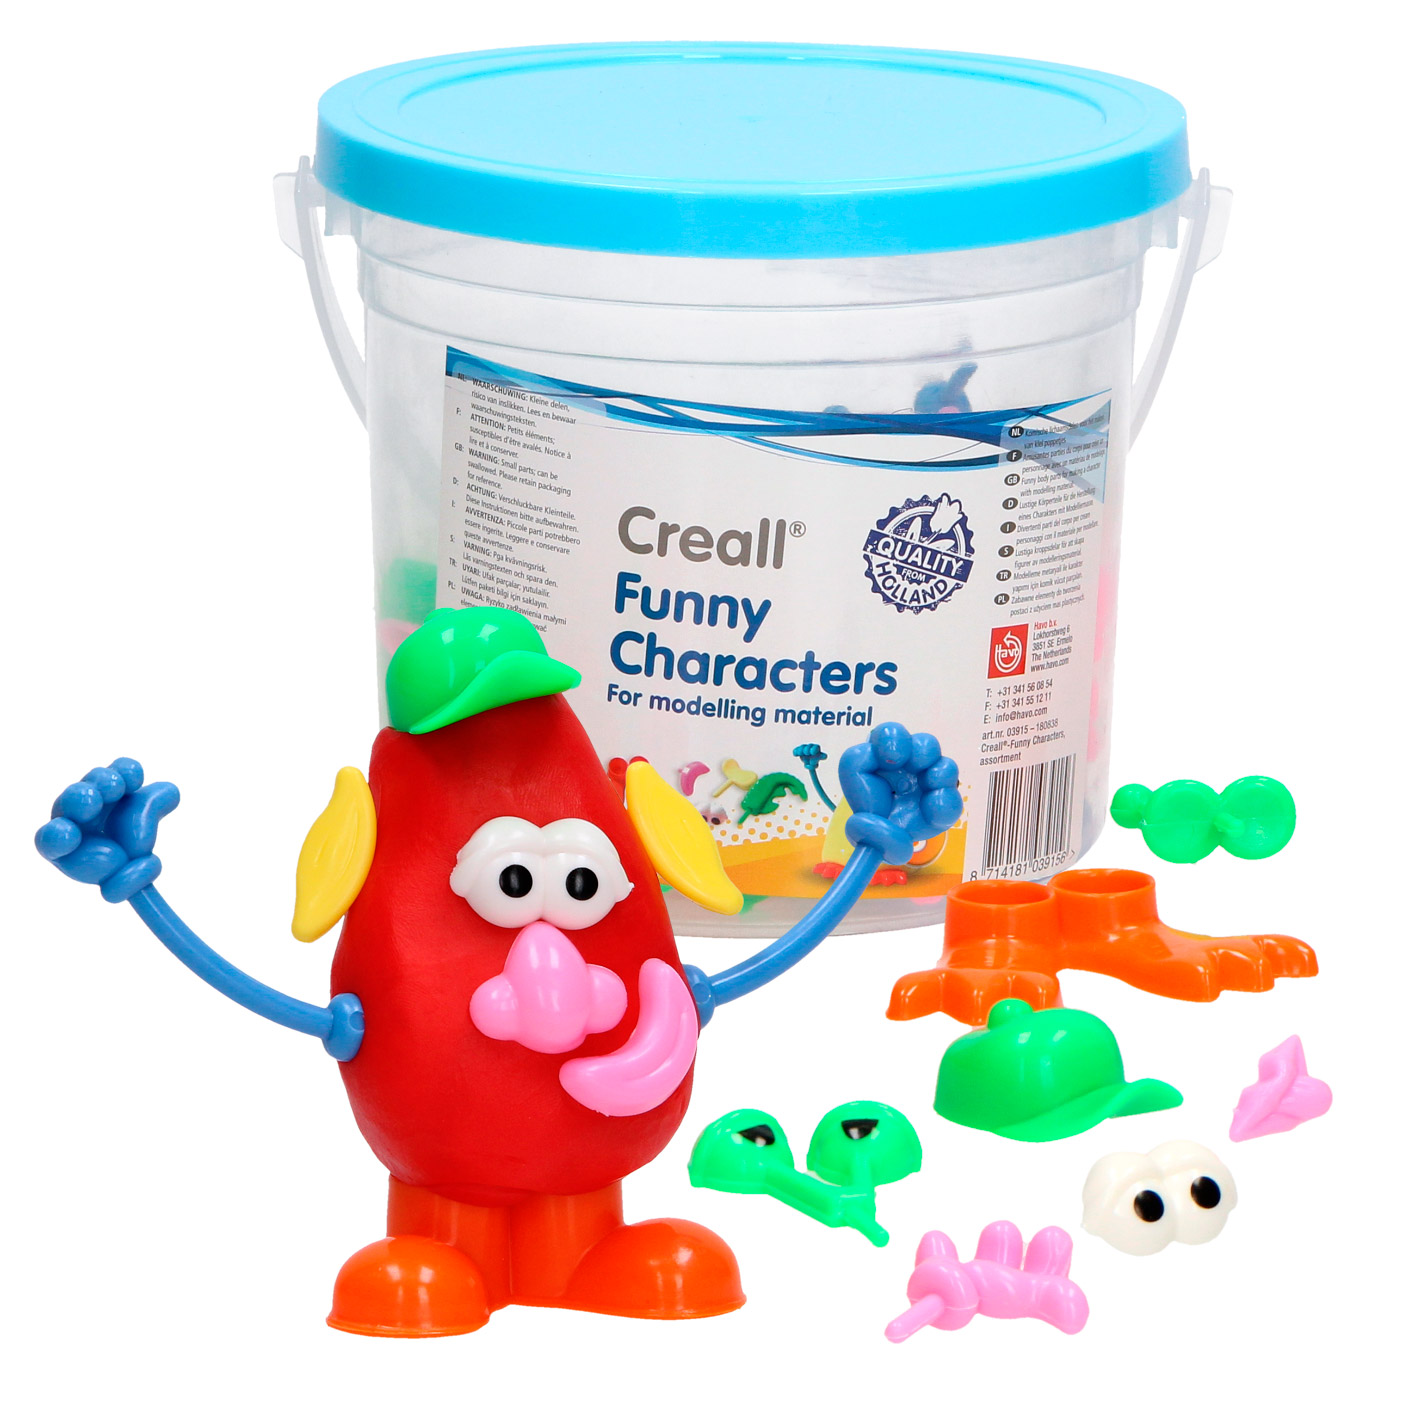 Geaccepteerd Modernisering zwaan Creall Funny Characters Clay Accessories, 130 pcs | Thimble Toys